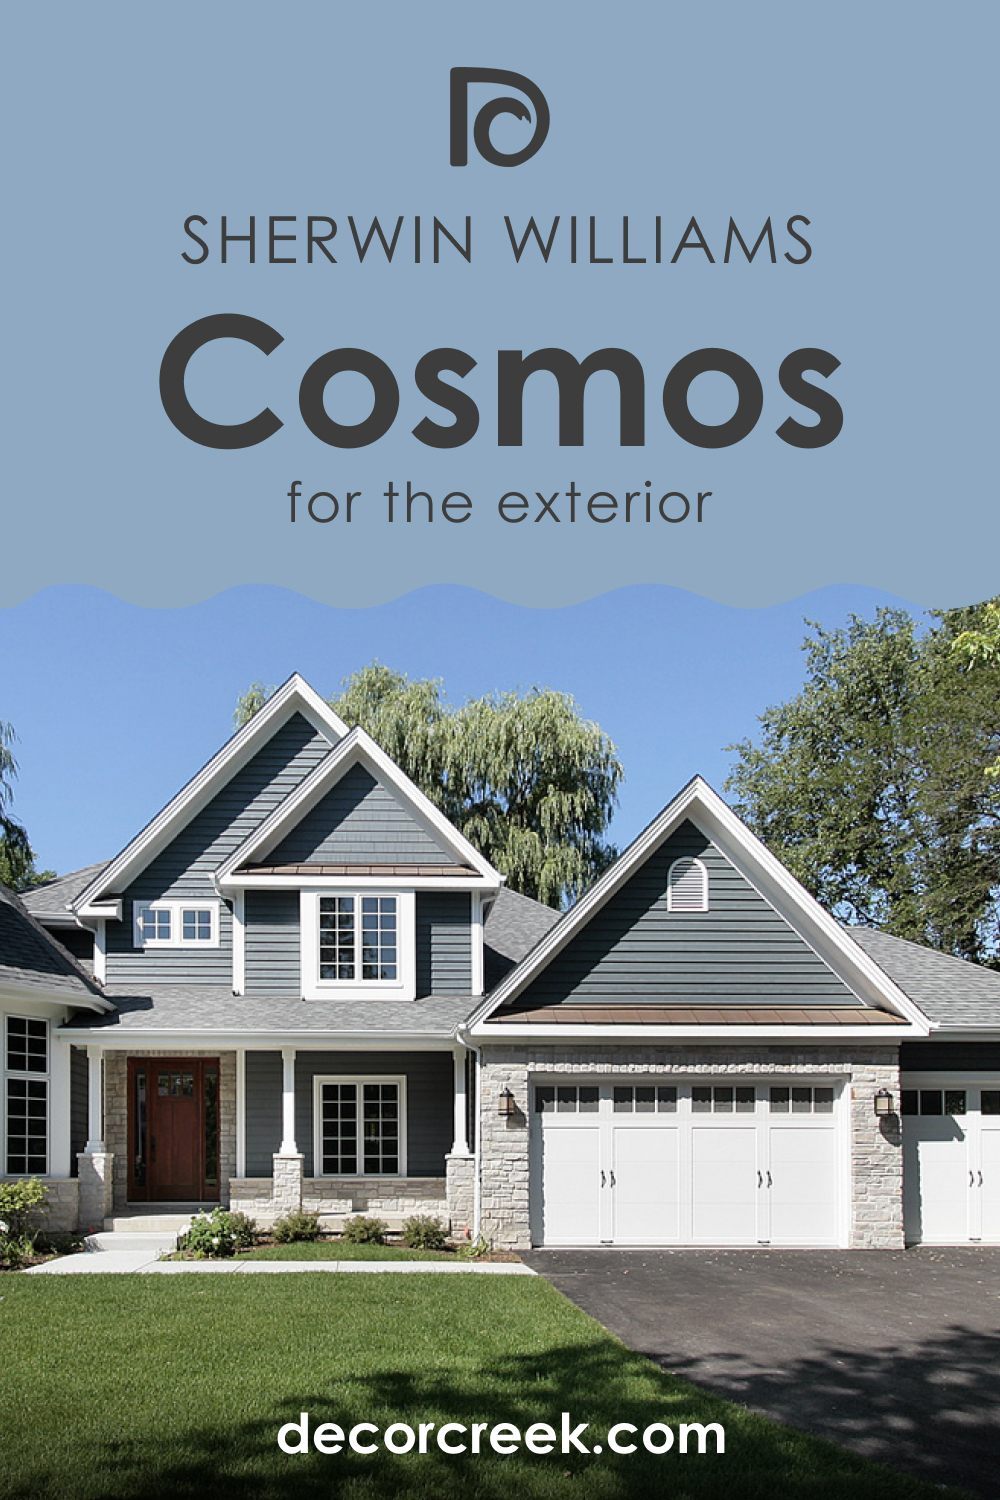 How to Use SW 6528 Cosmos for an Exterior?